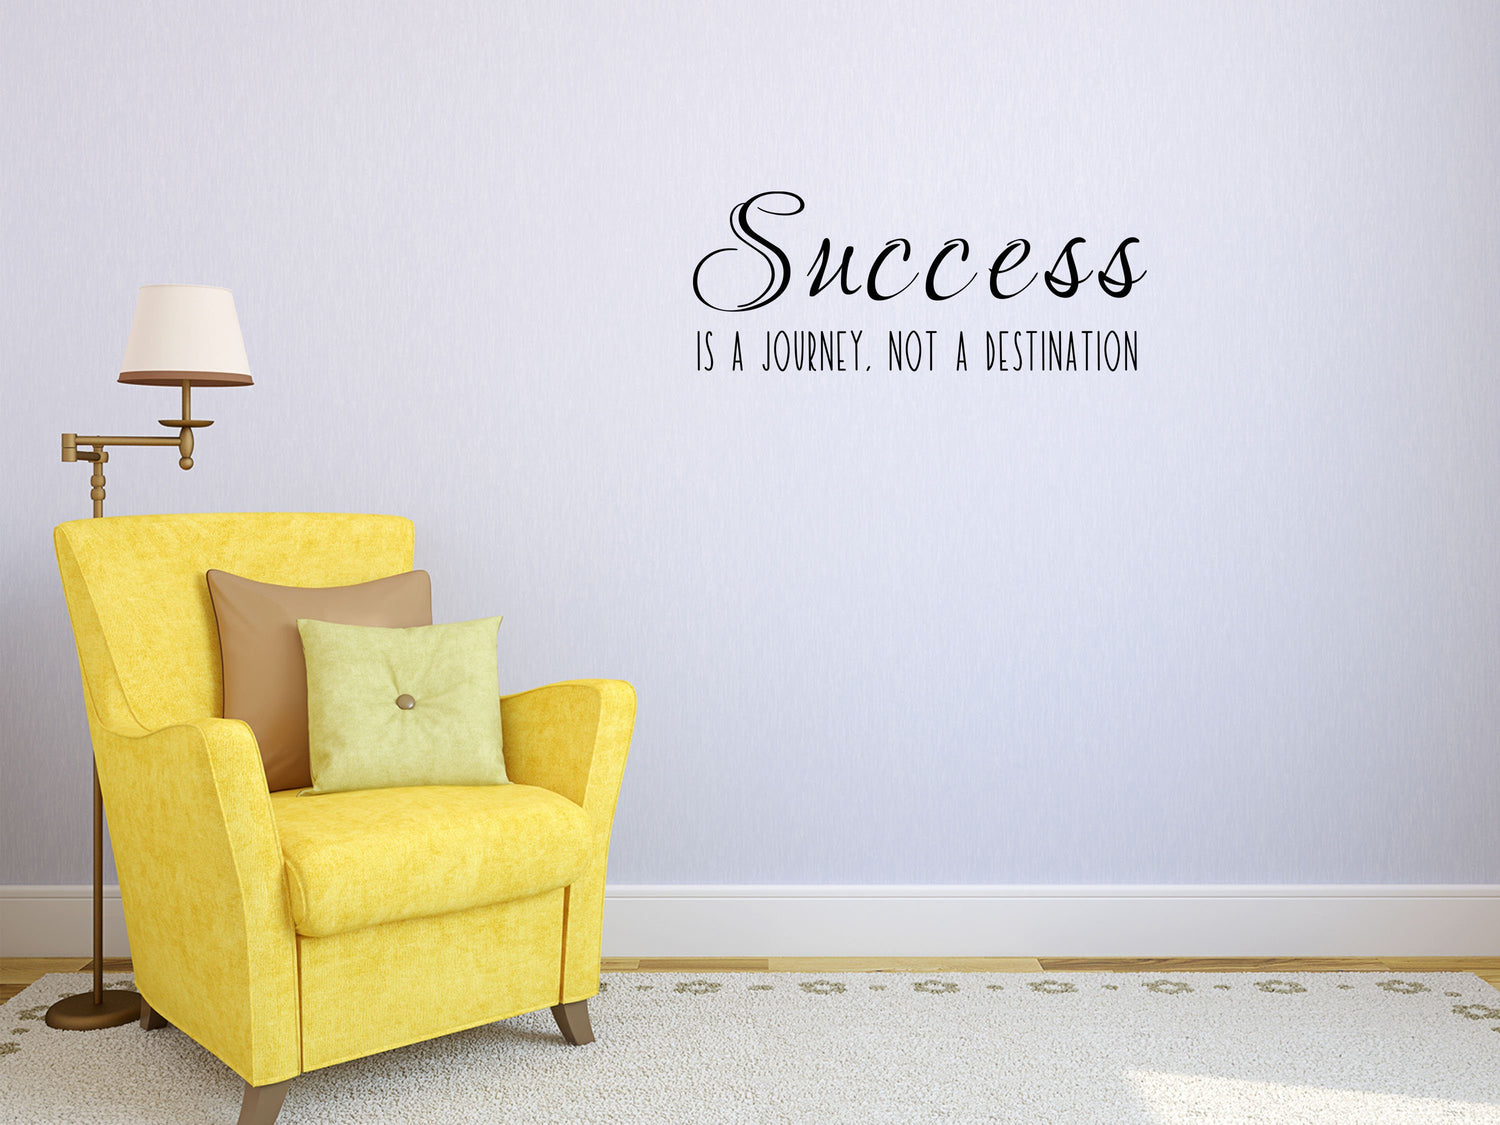 Success Is A Journey Not A Destination - Inspirational Wall Decals Vinyl Wall Decal Inspirational Wall Signs 